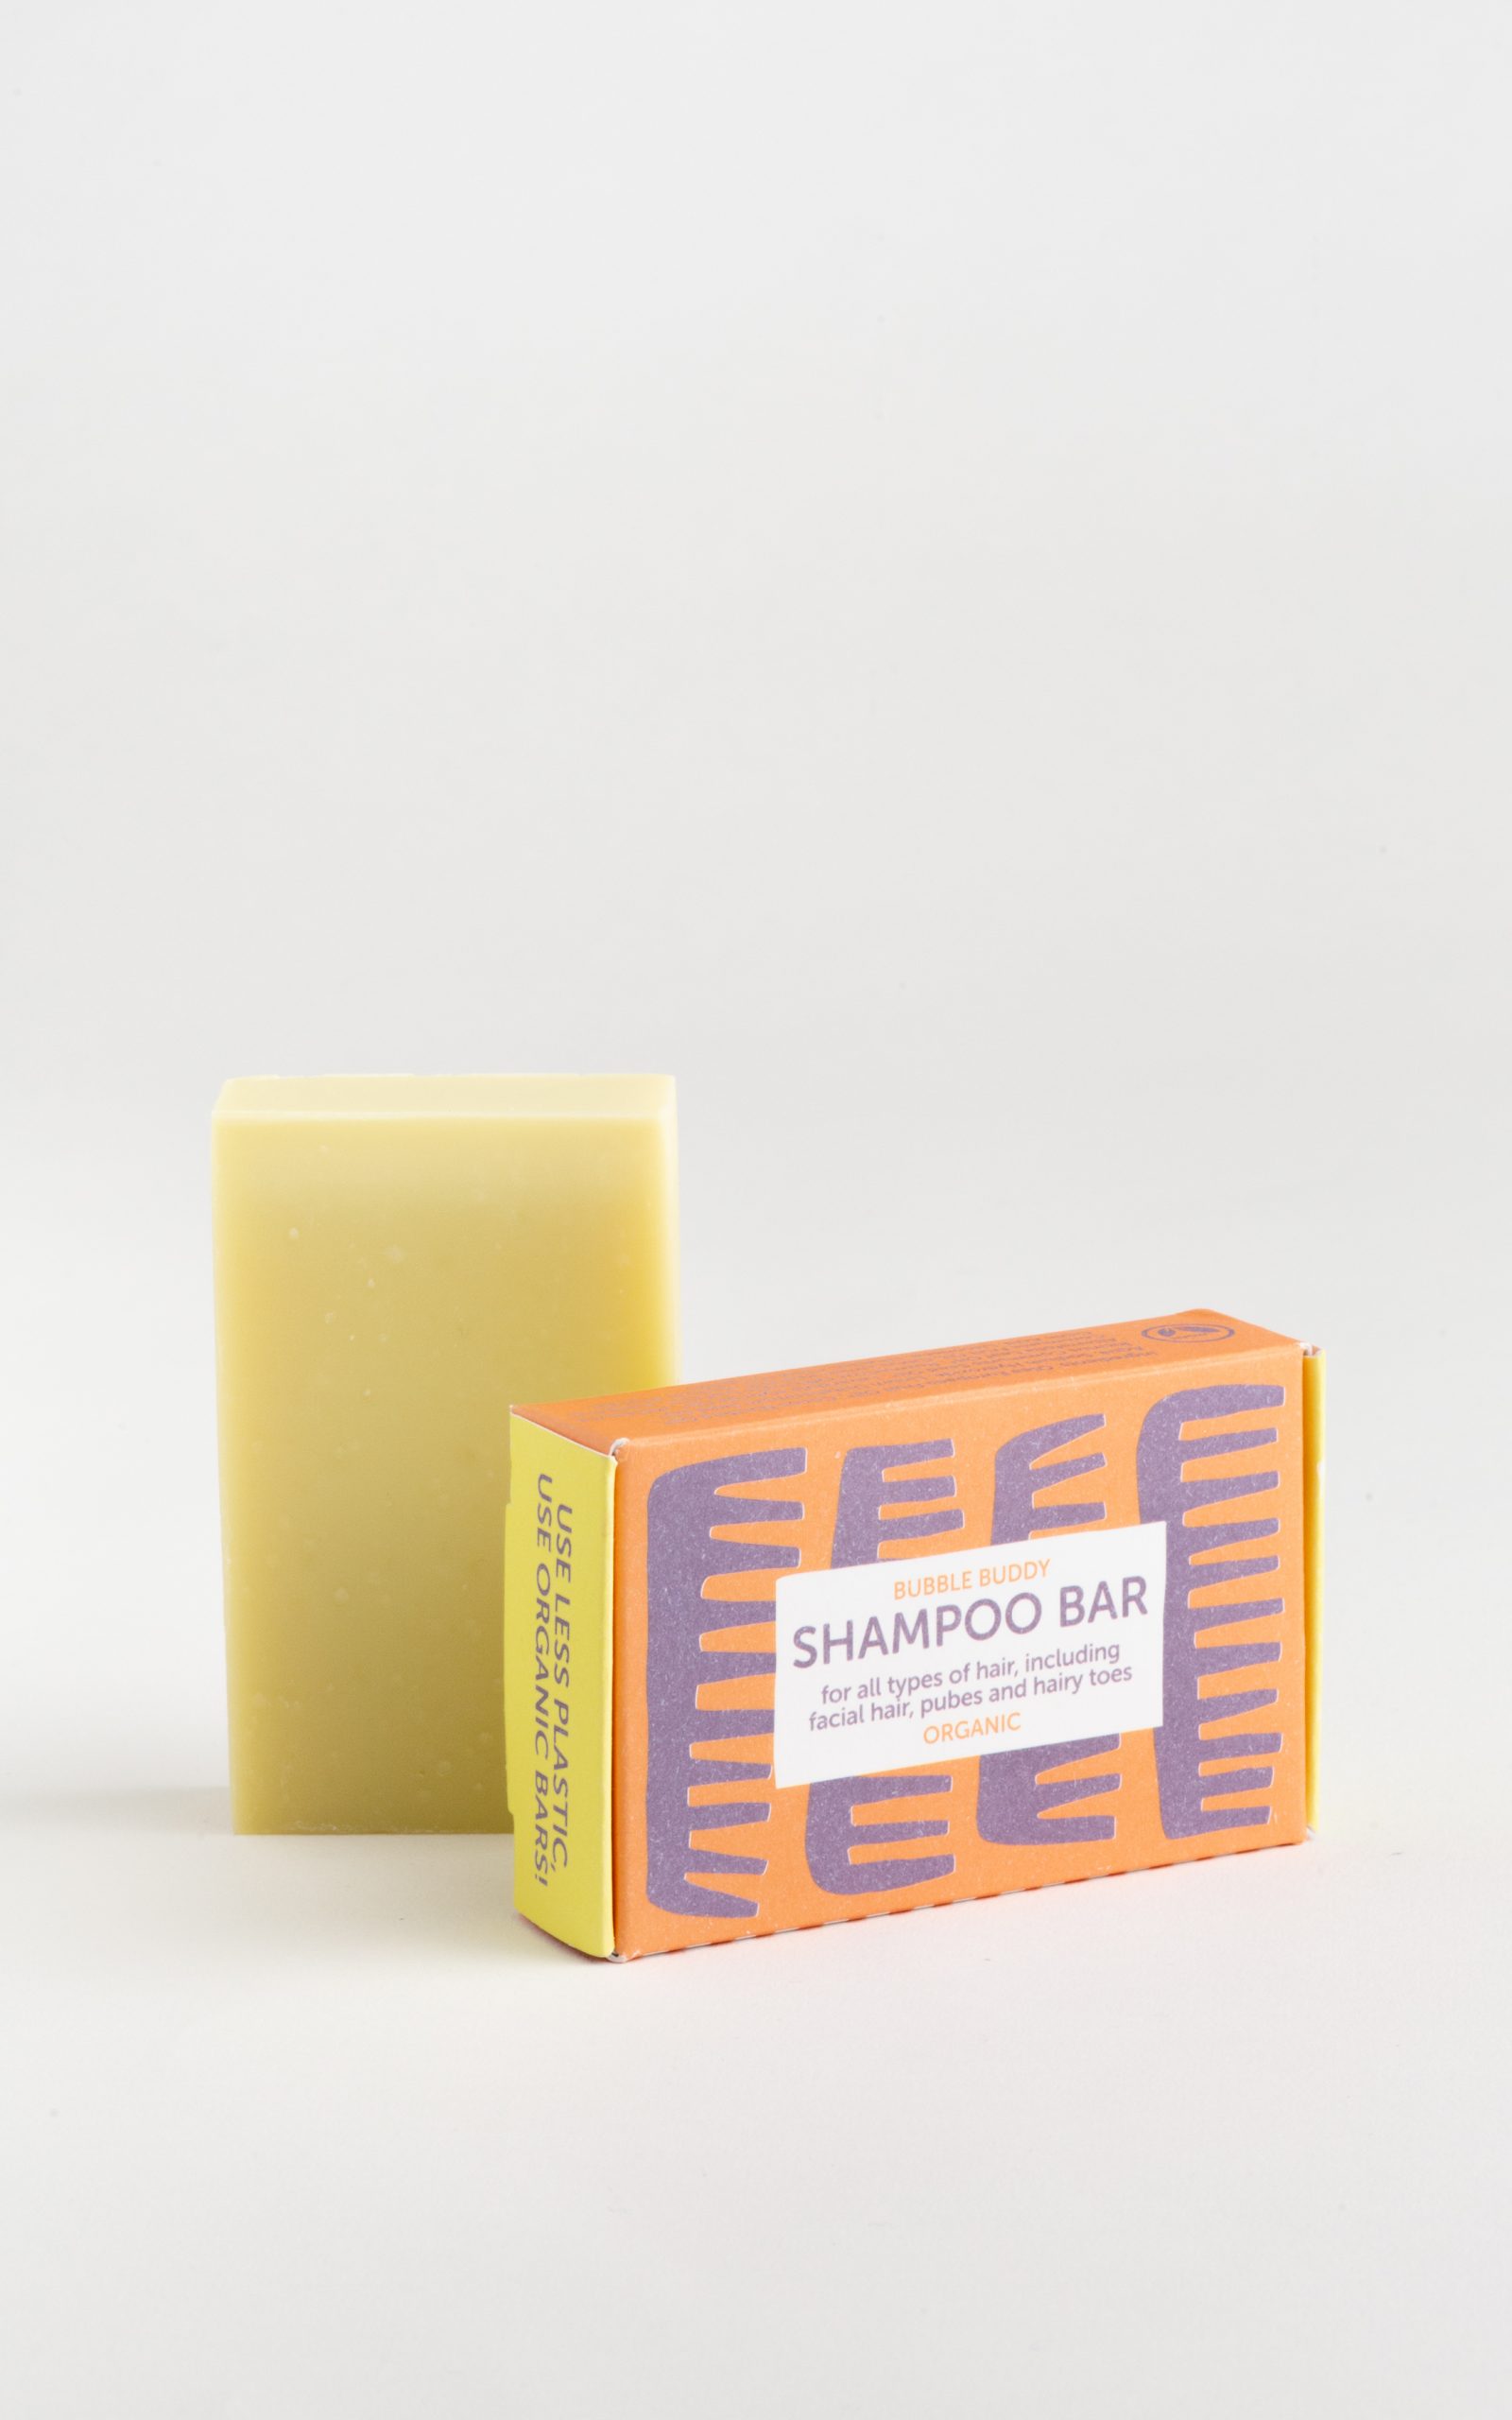 Organic shampoo soap bar also suitable for hand luggage